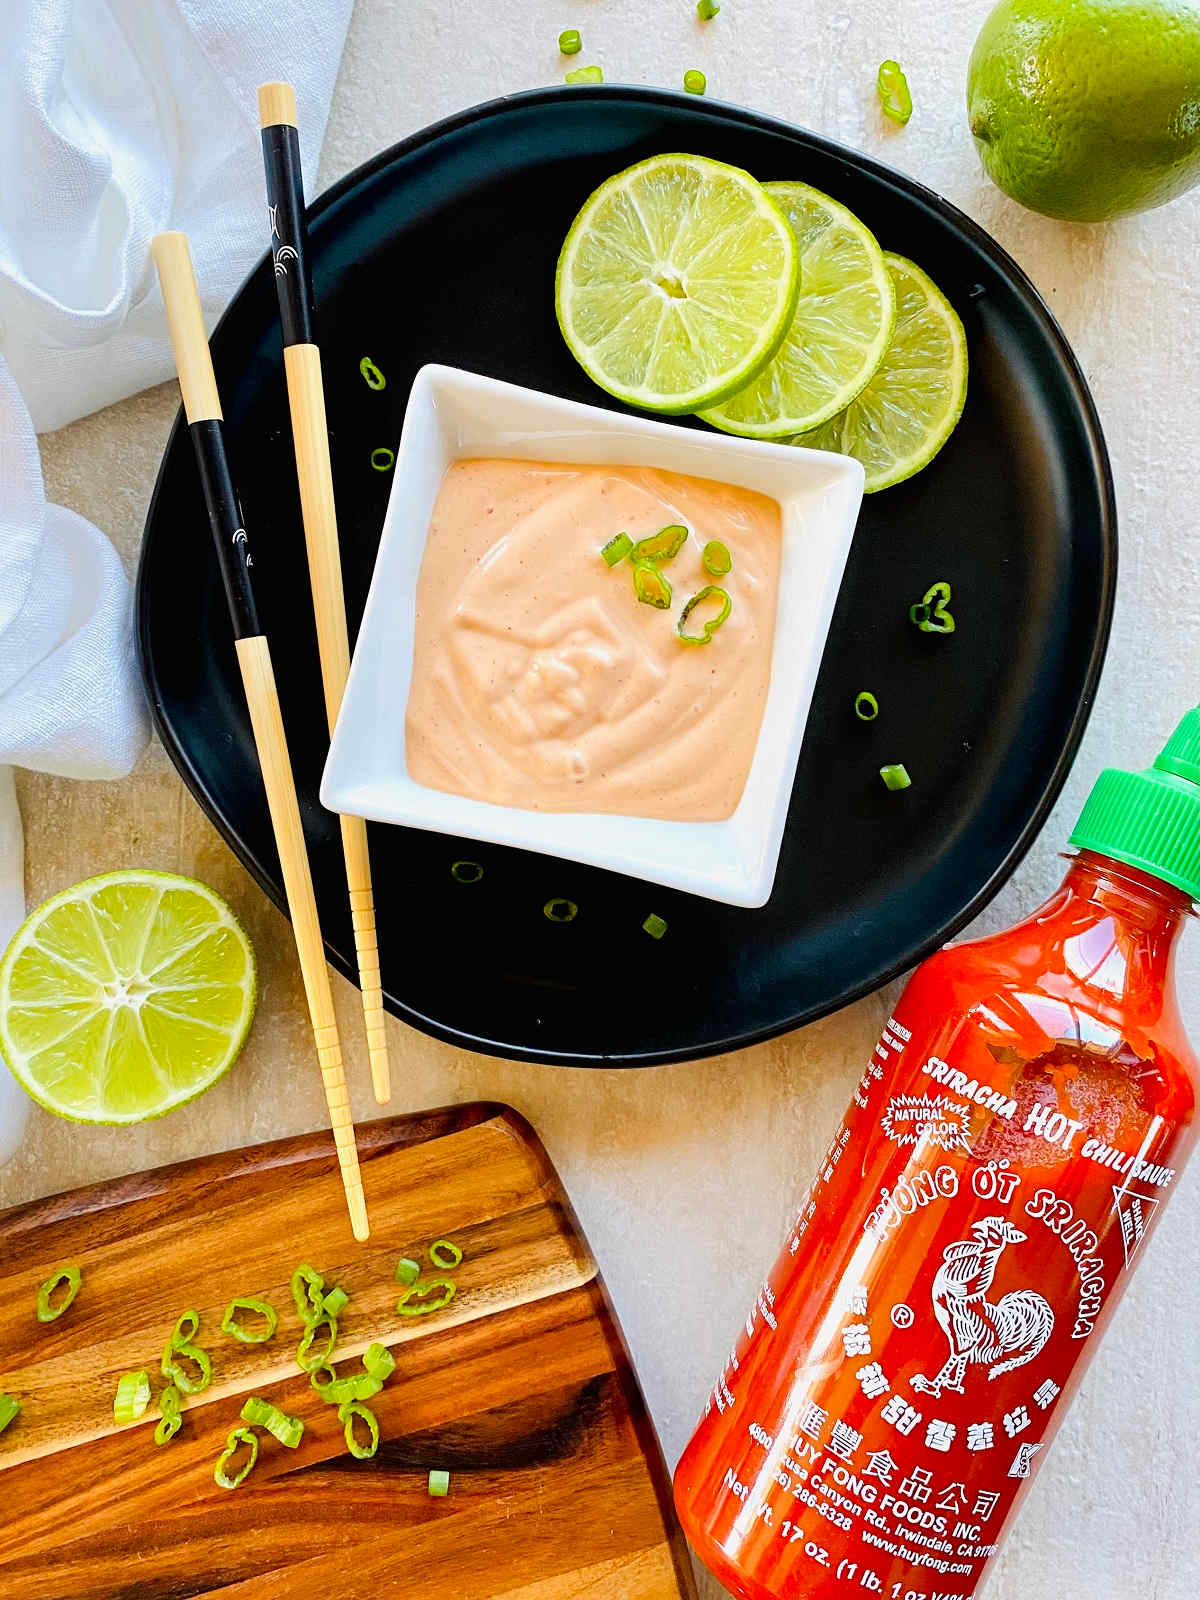 sriracha aioli in a dish next to a bottle of Huy Fong Sriracha Hot Chile Sauce with limes, chopsticks and scallions.